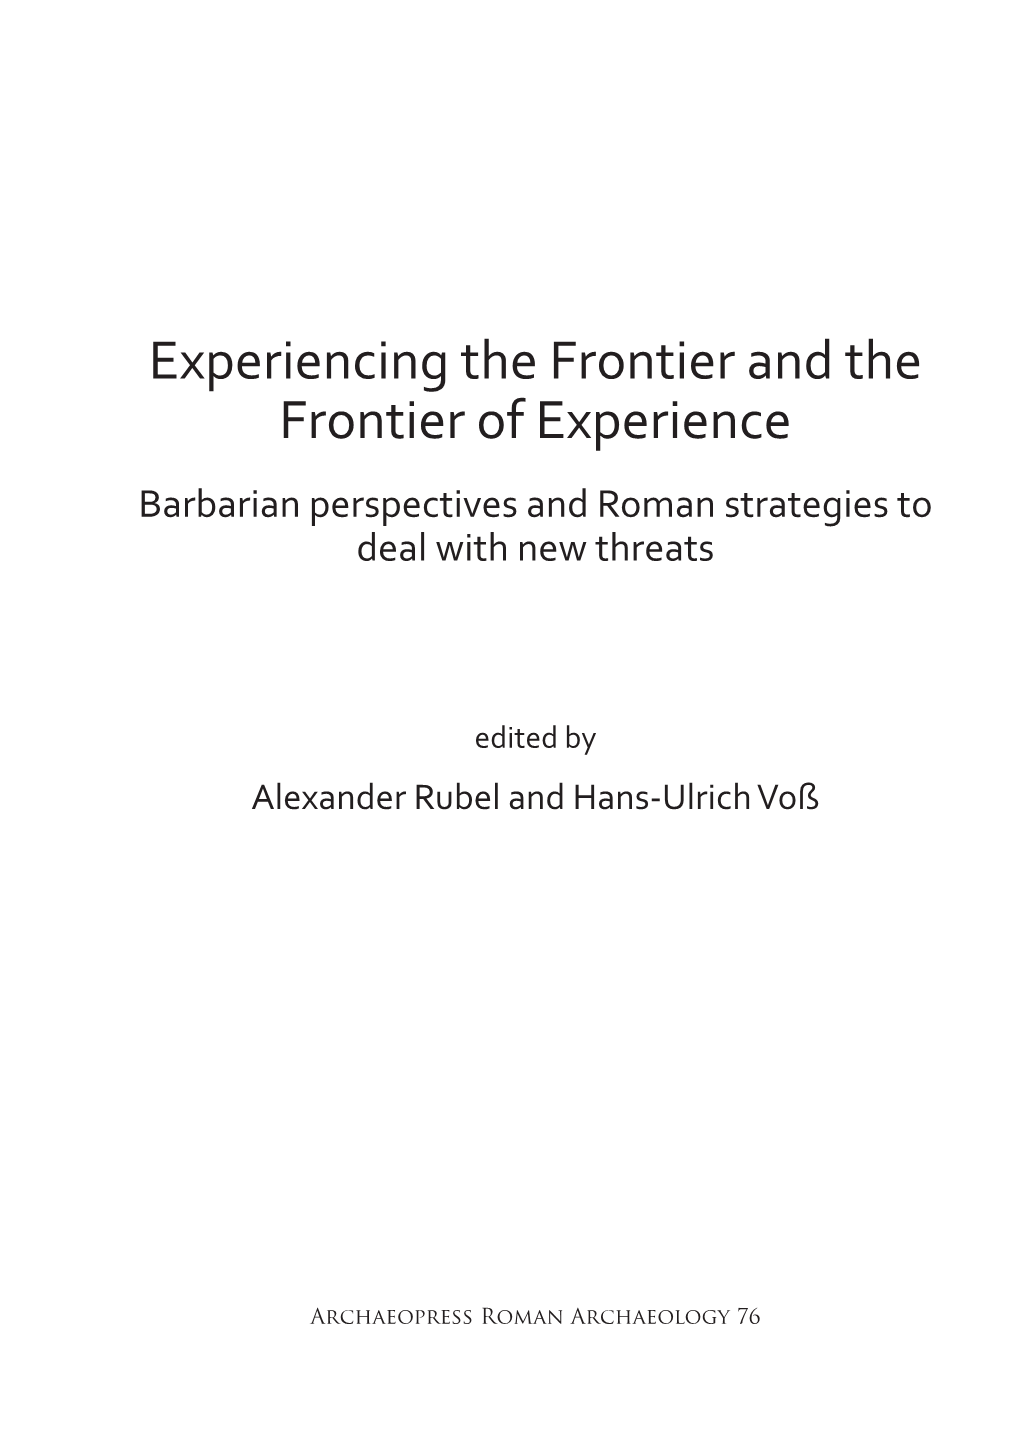 Experiencing the Frontier and the Frontier of Experience Barbarian Perspectives and Roman Strategies to Deal with New Threats